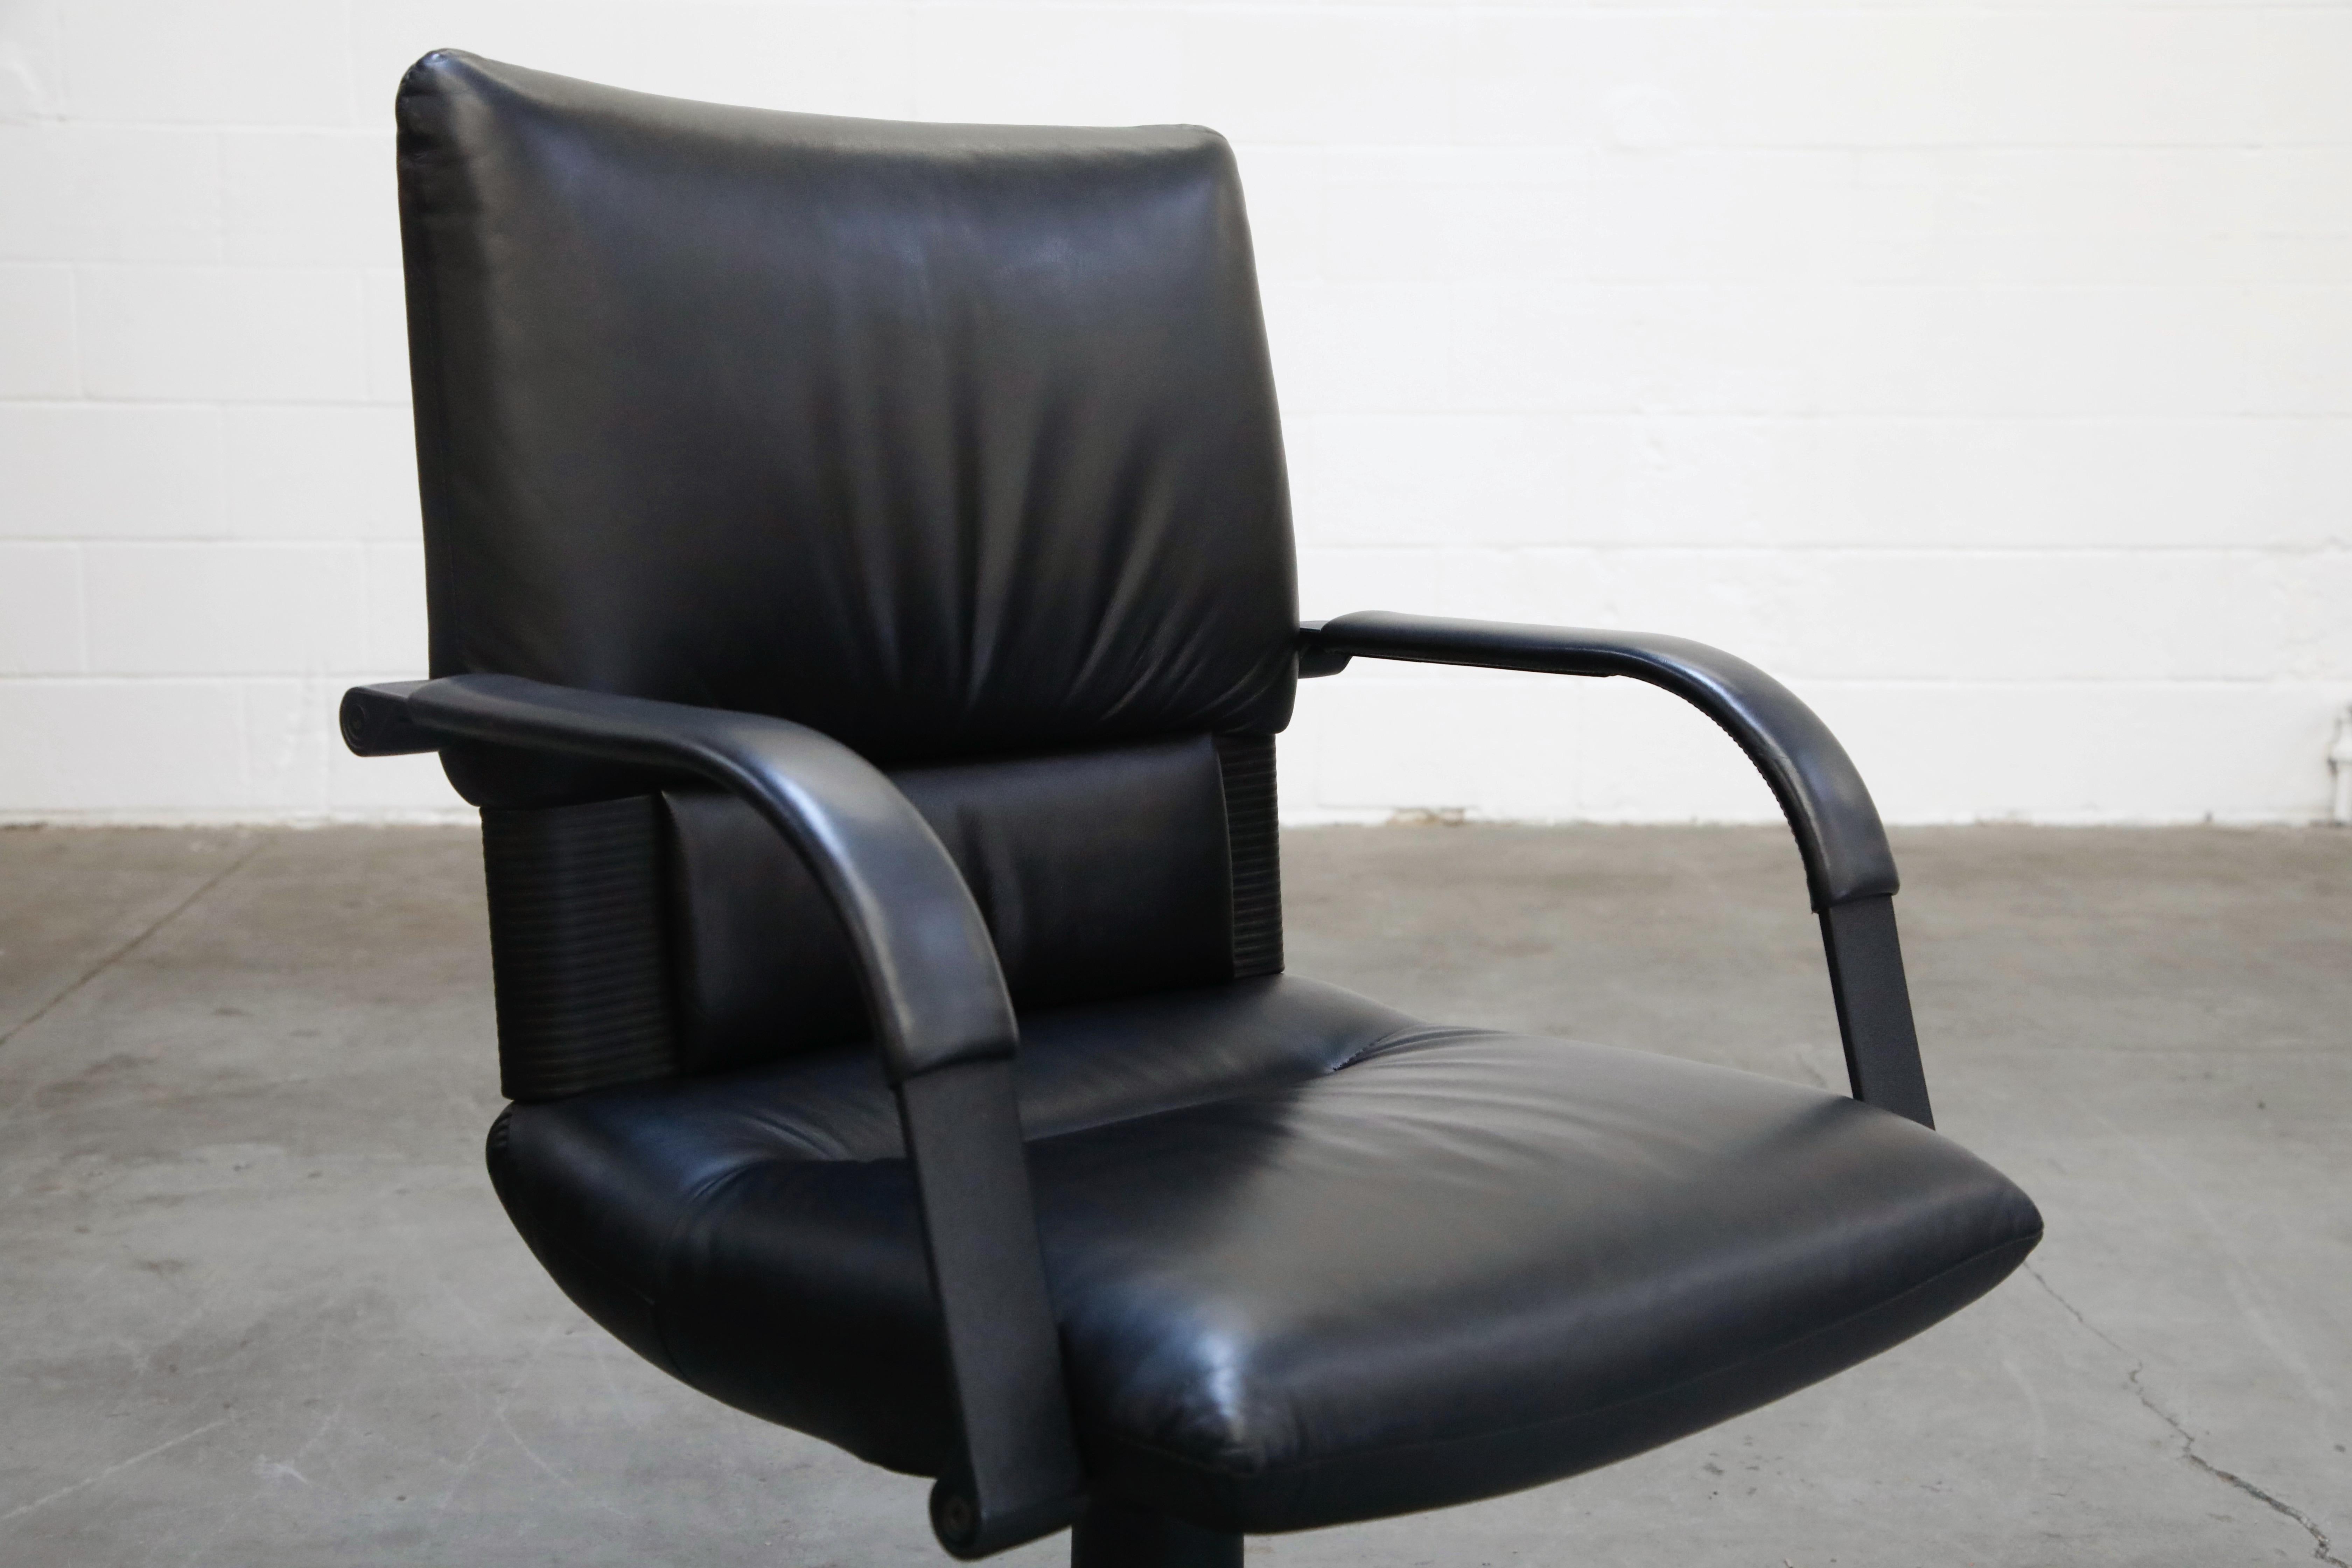 Mario Bellini Post-Modern Executive Desk Chair for Vitra, Signed and Dated 1992 For Sale 4